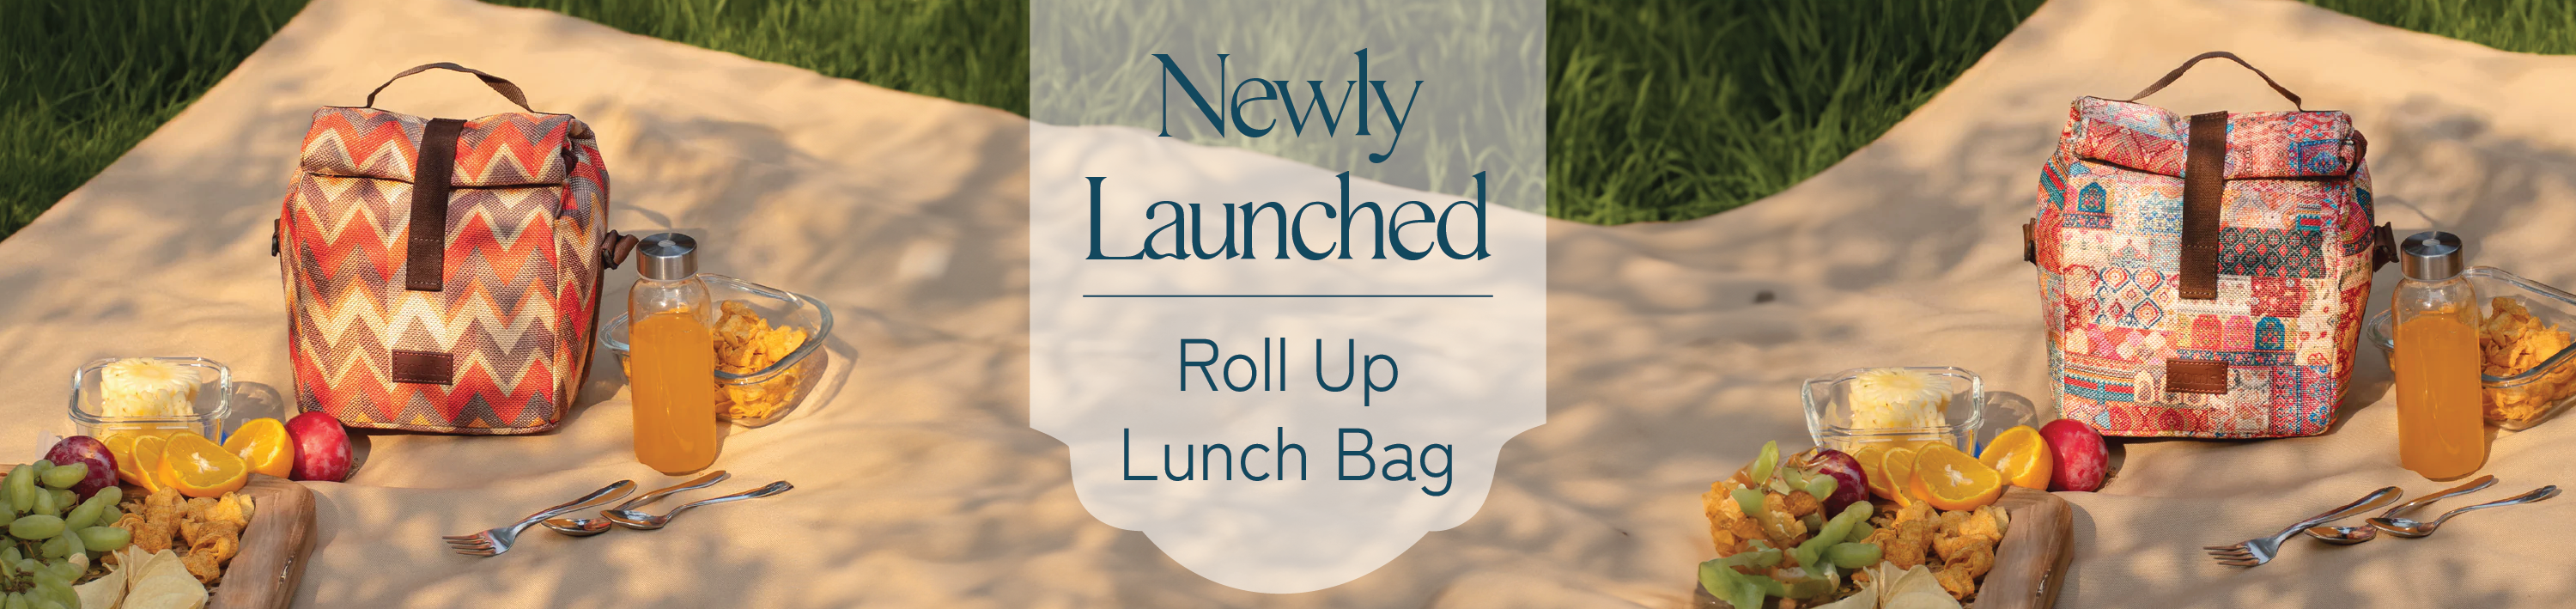 Roll Up Lunch Bag